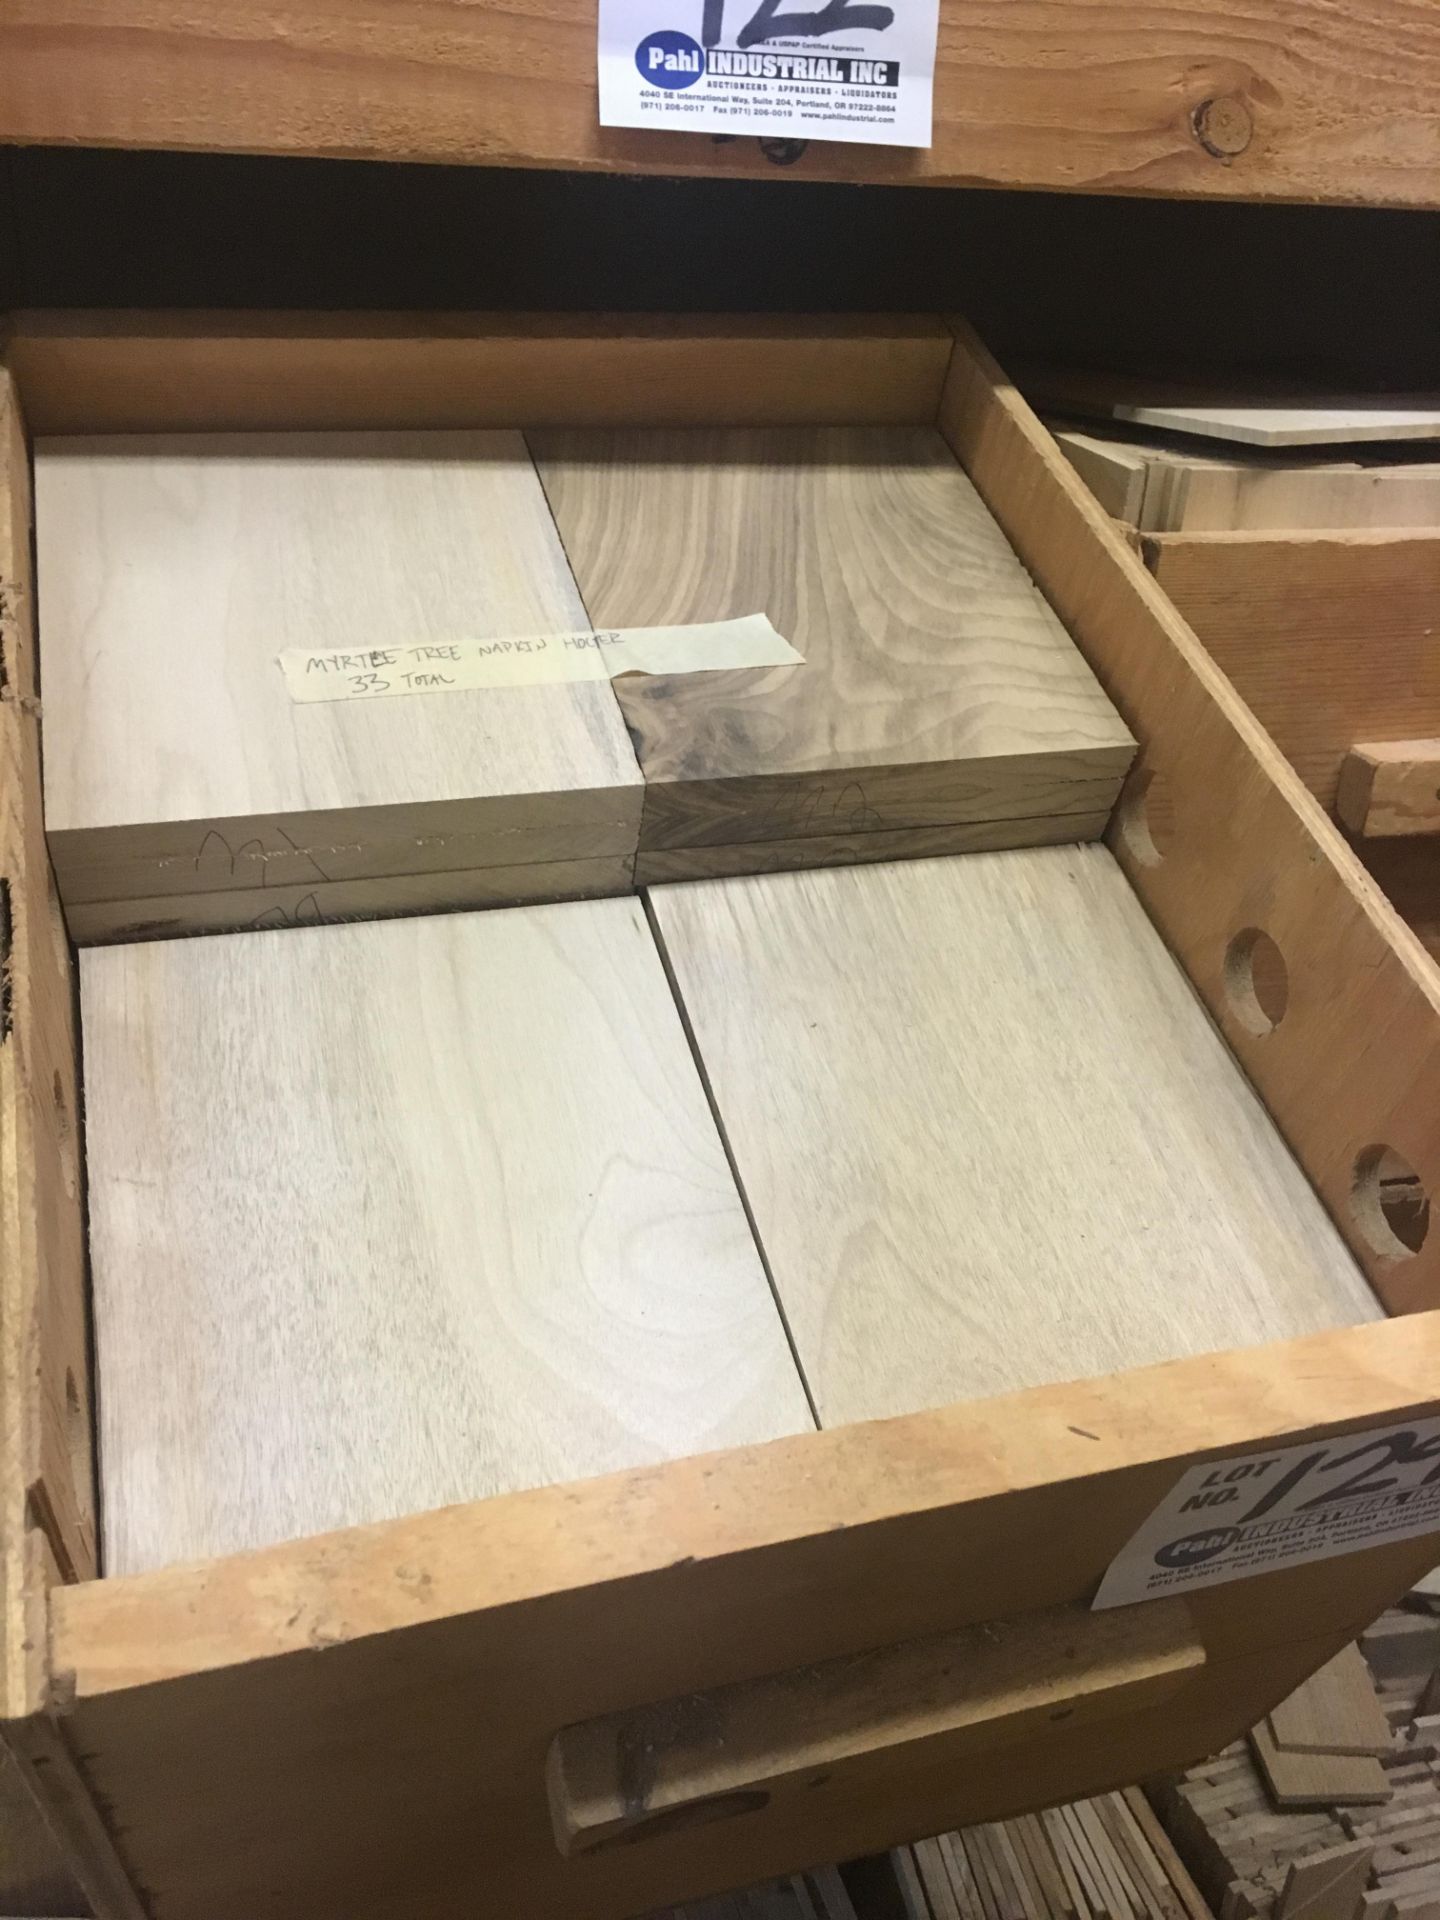 Box of 6.5" x 7.5" x 1/2" Thick Myrtlewood stock